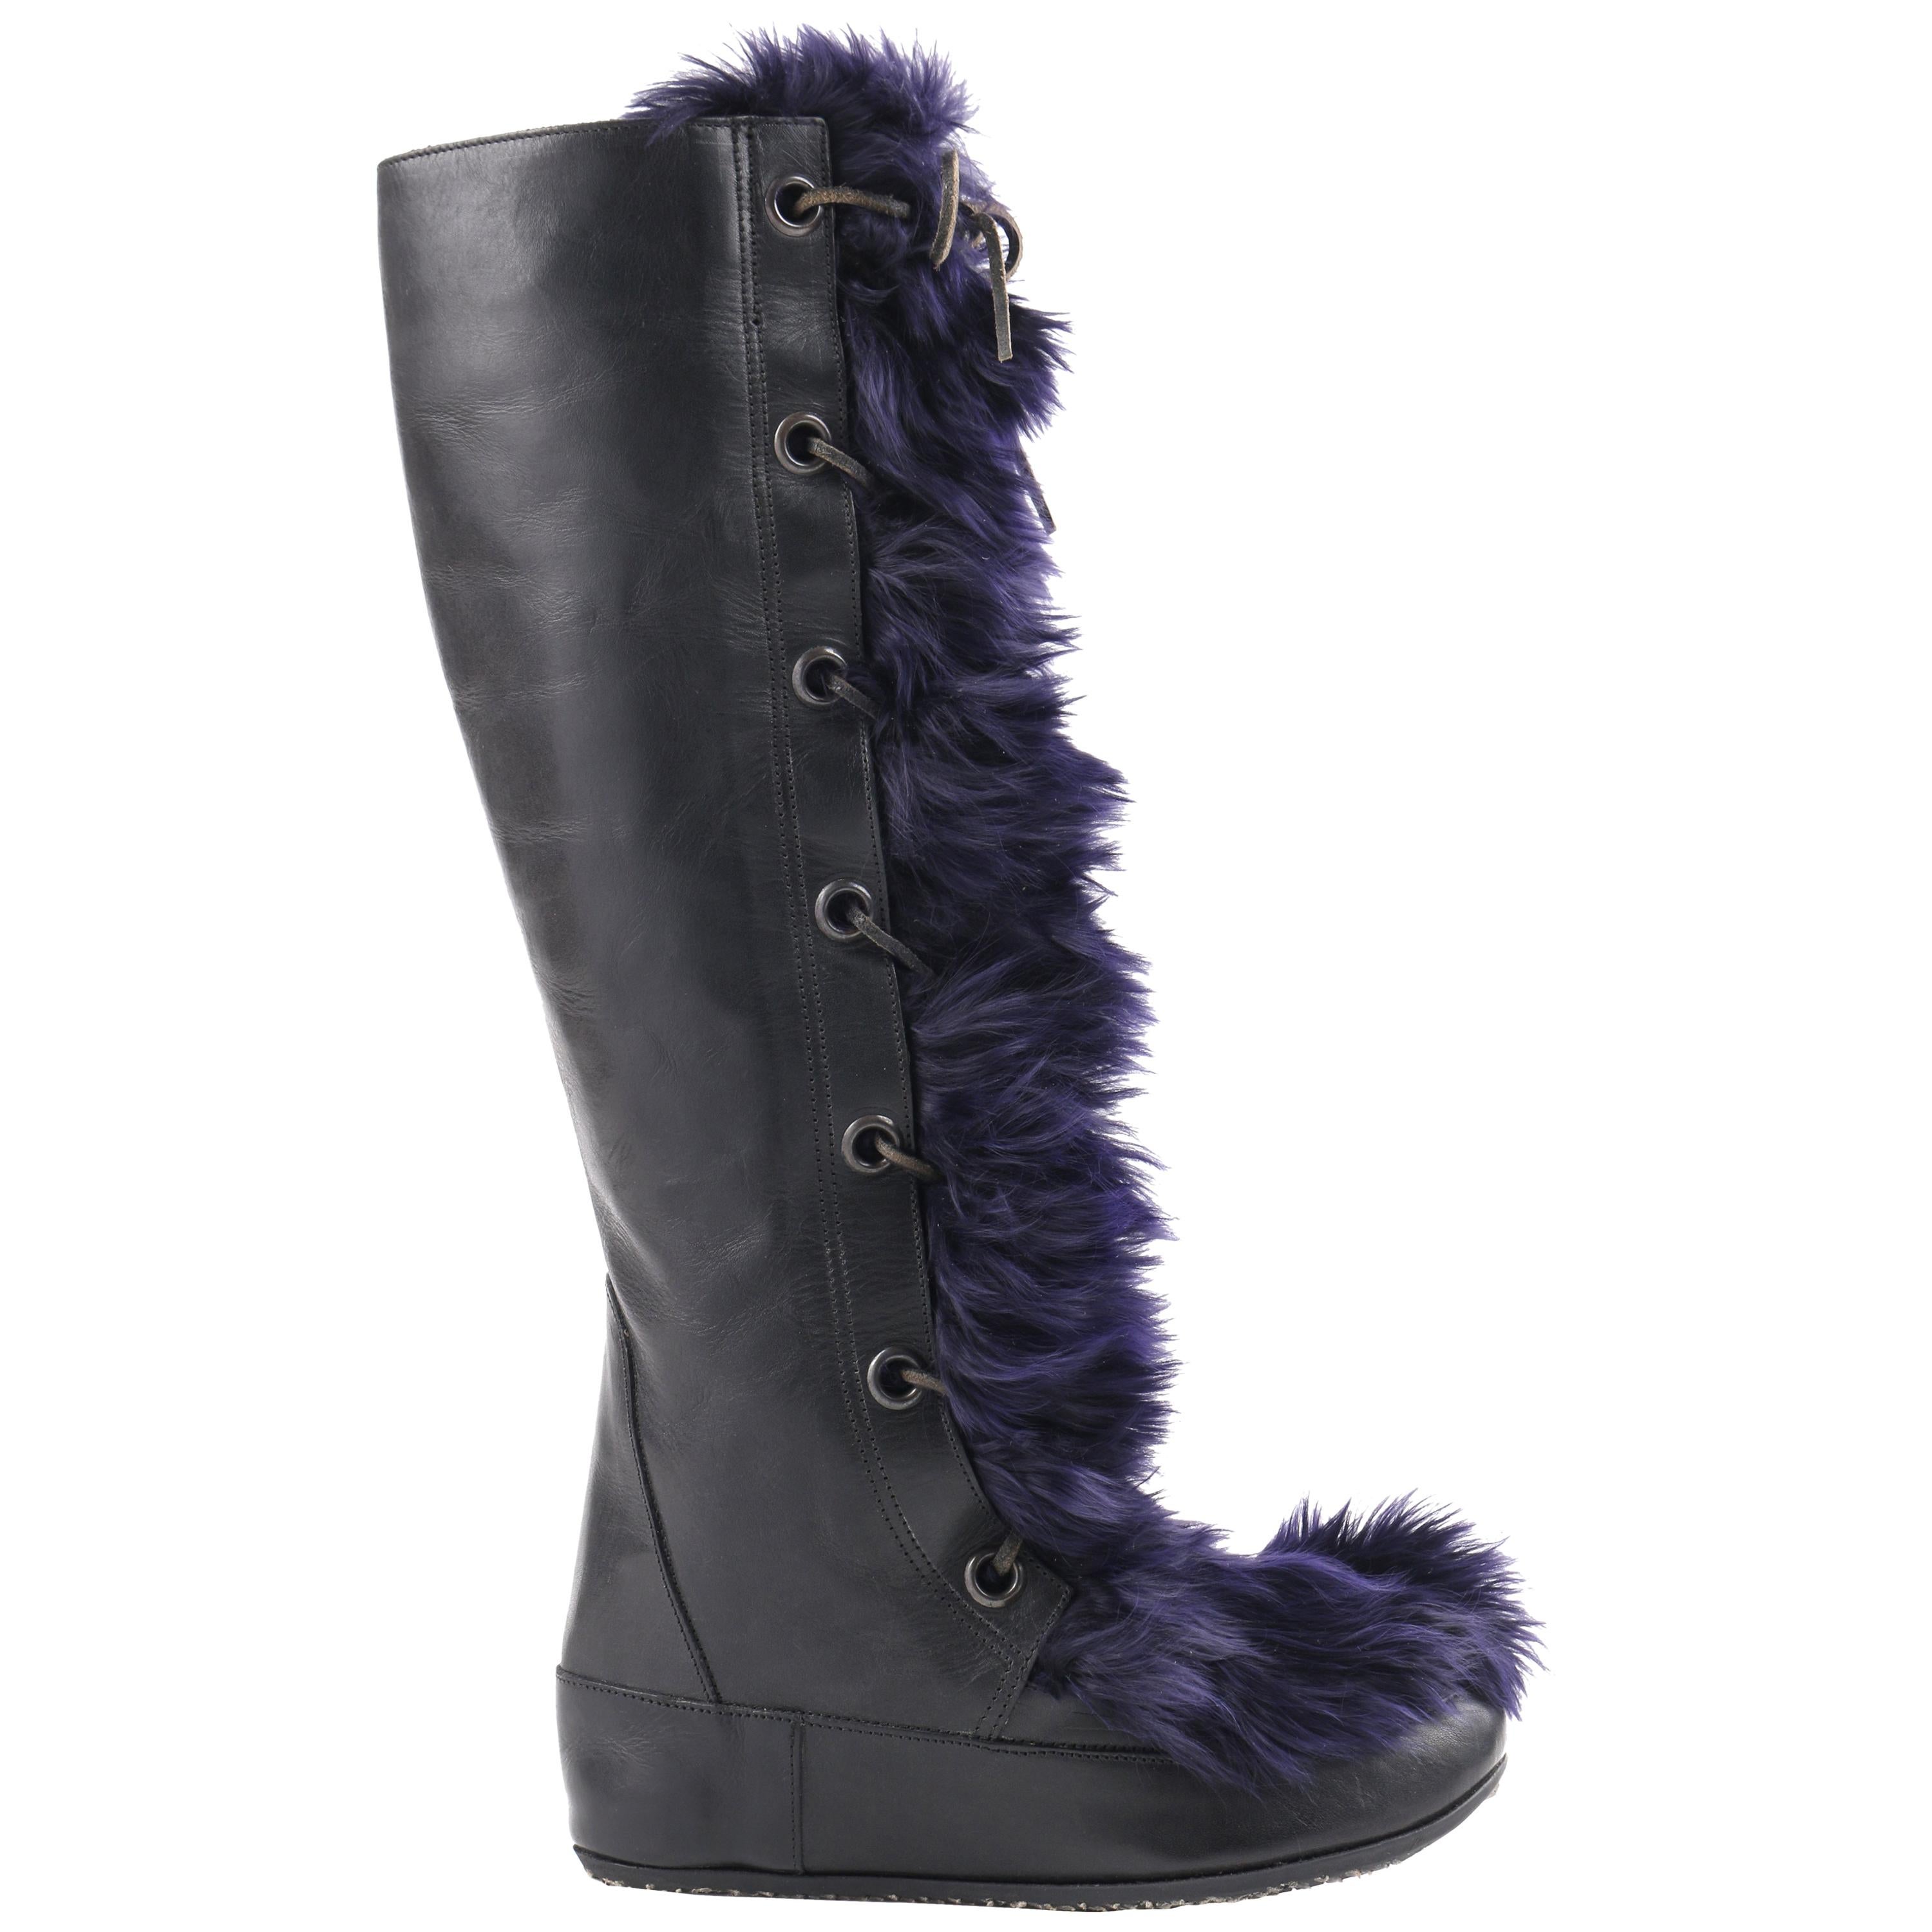 MARNI Black Leather & Navy Blue Angora Fur Lace Up Knee-High Apres Boots